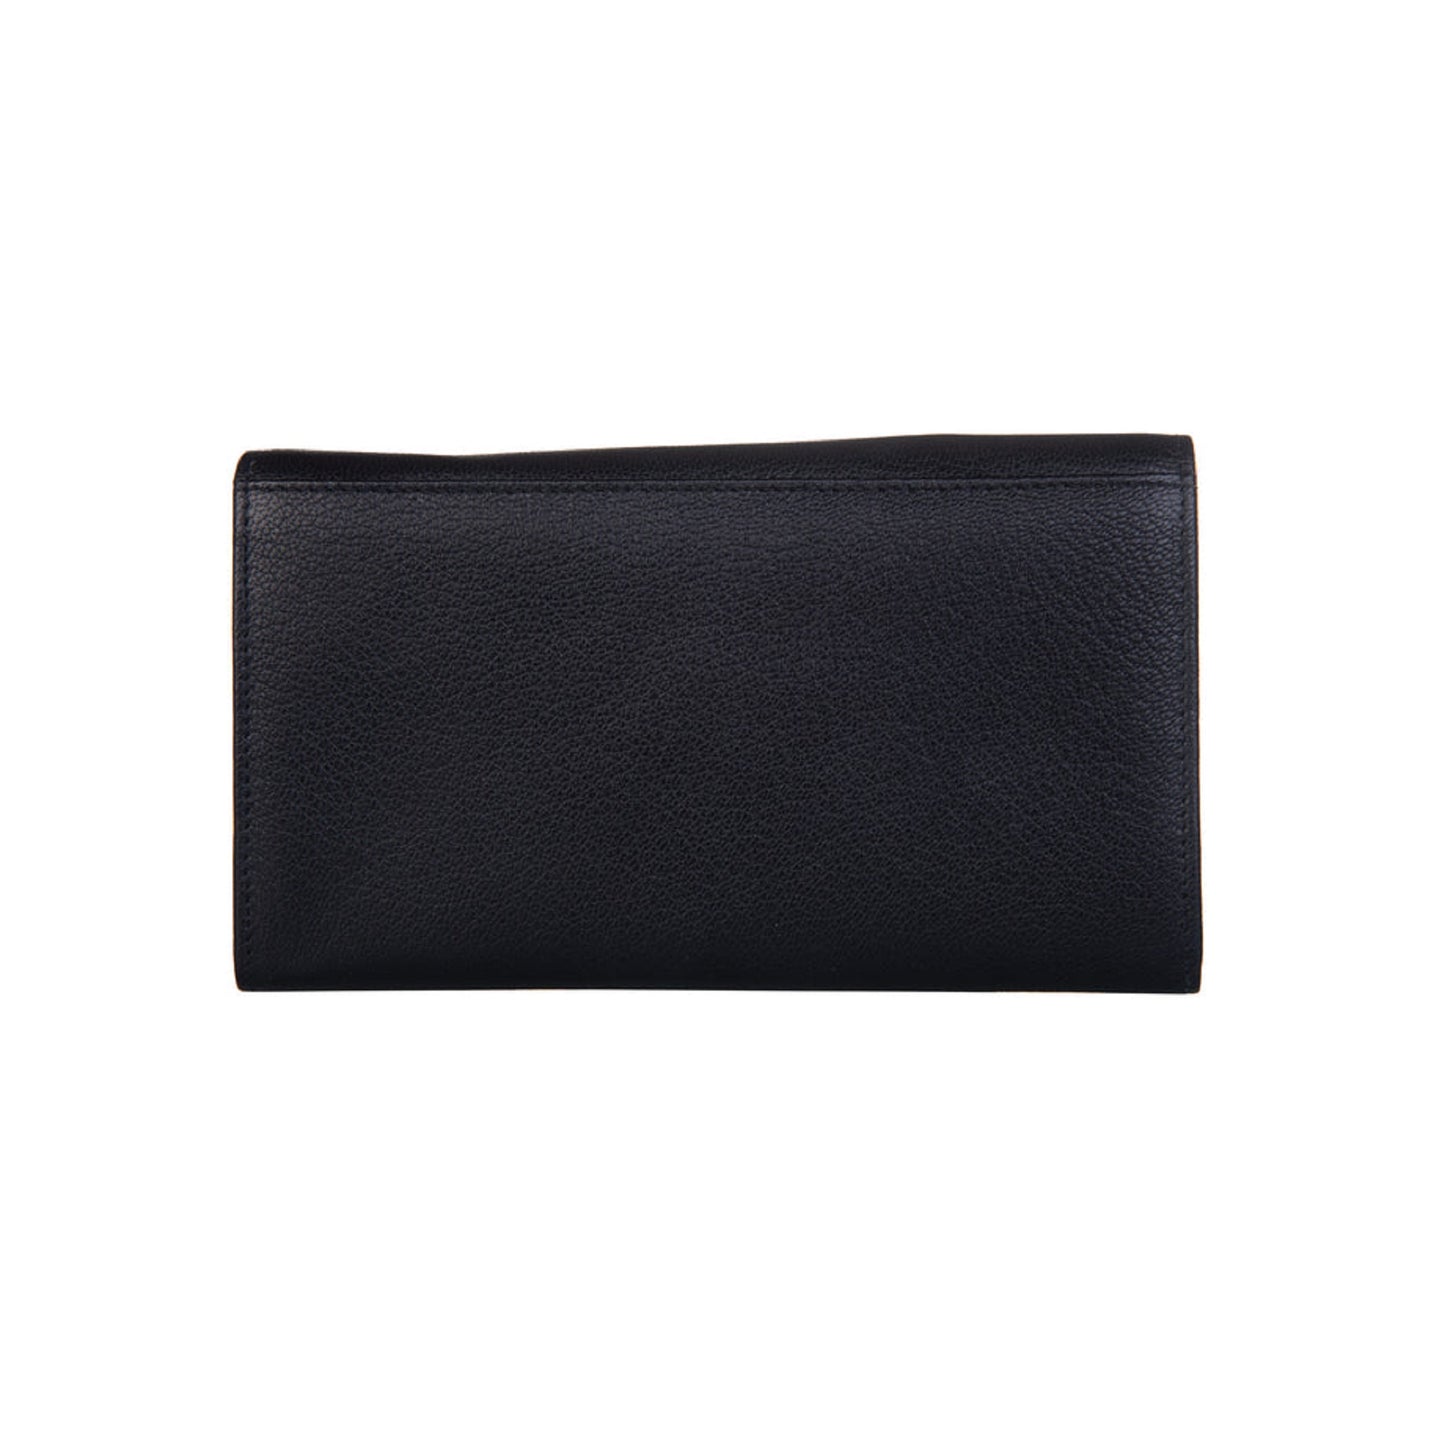 Shiloh Matinee Wallet Leather - Black